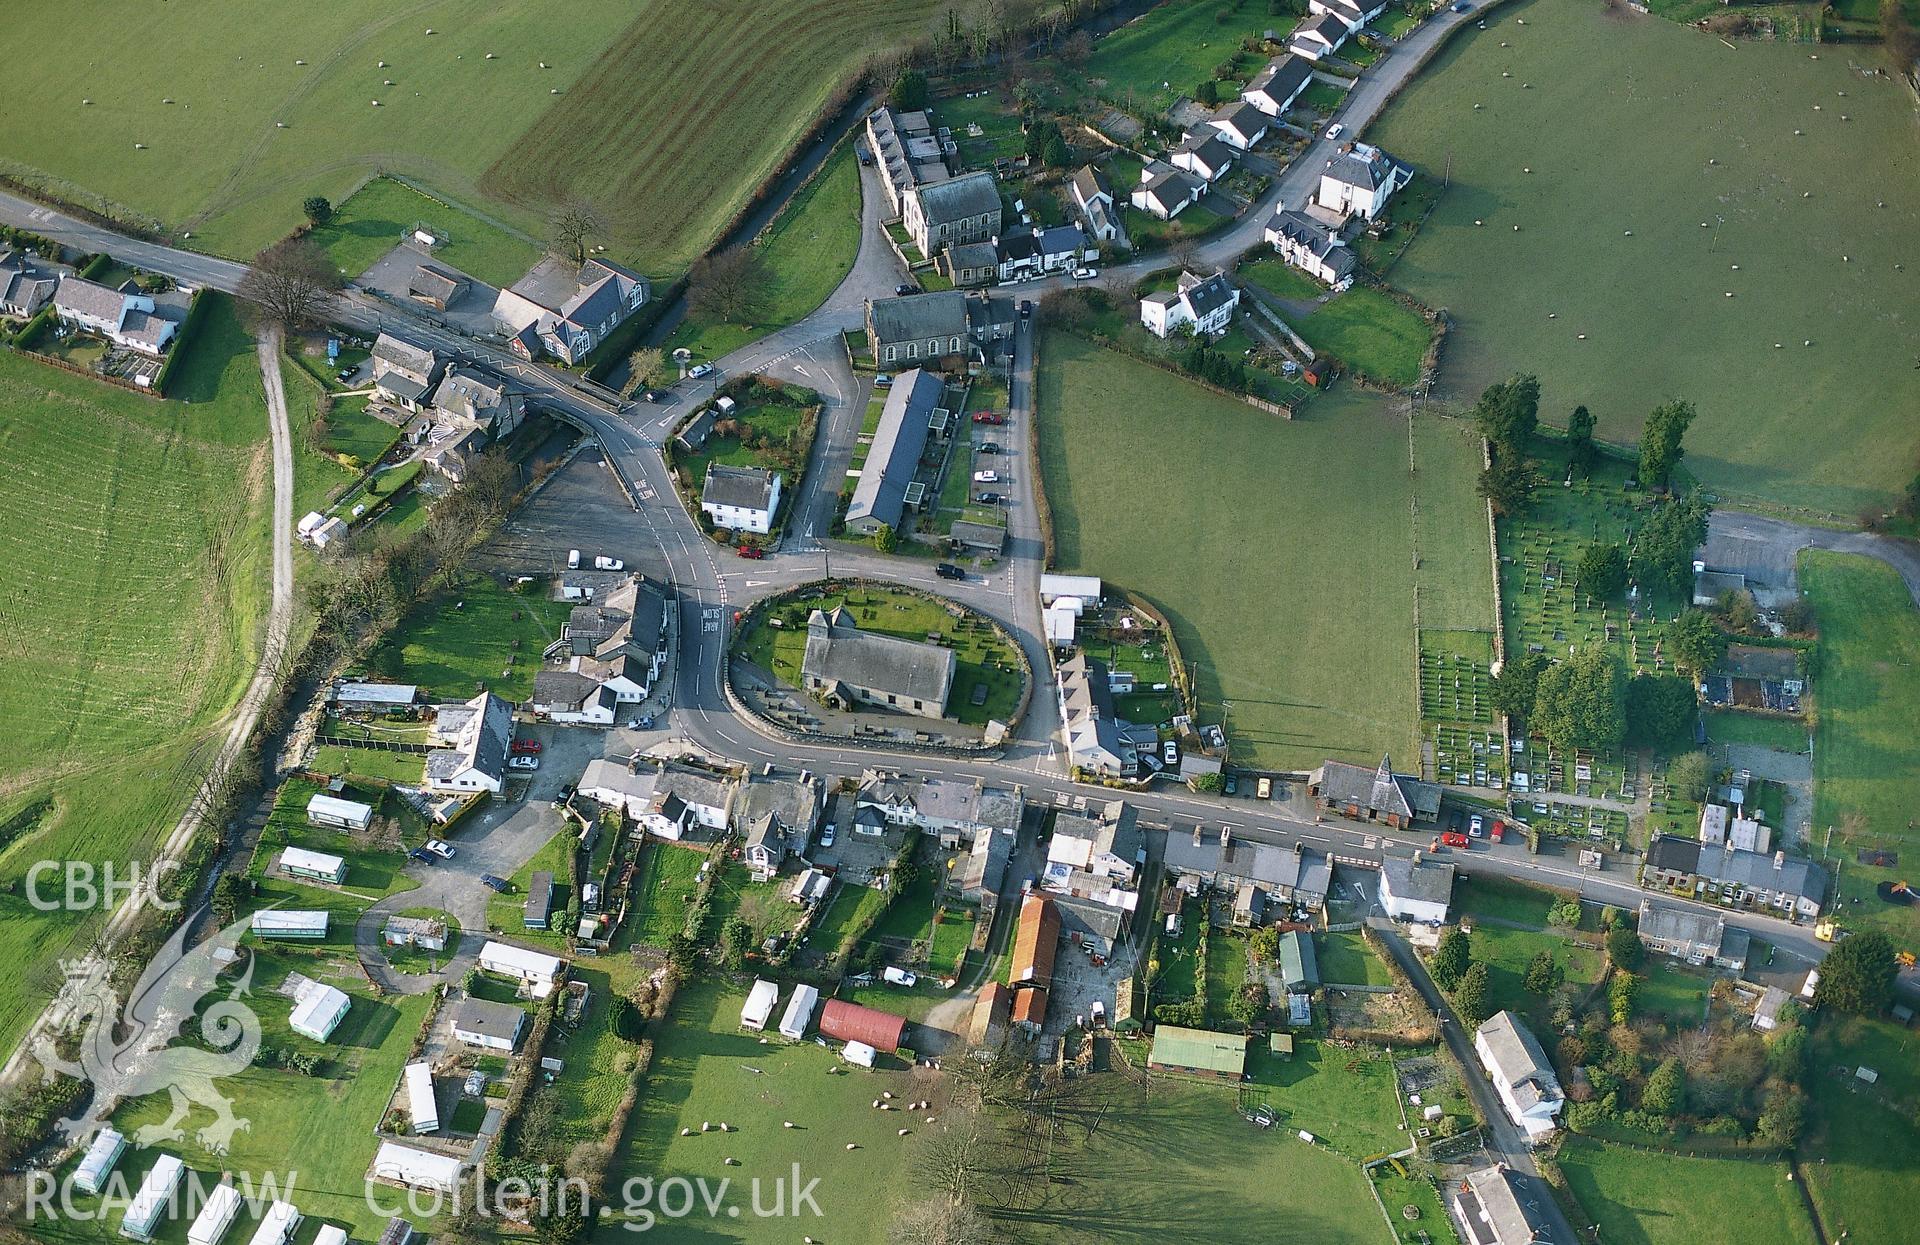 Slide of RCAHMW colour oblique aerial photograph of Pennal, taken by T.G. Driver, 17/3/1999.